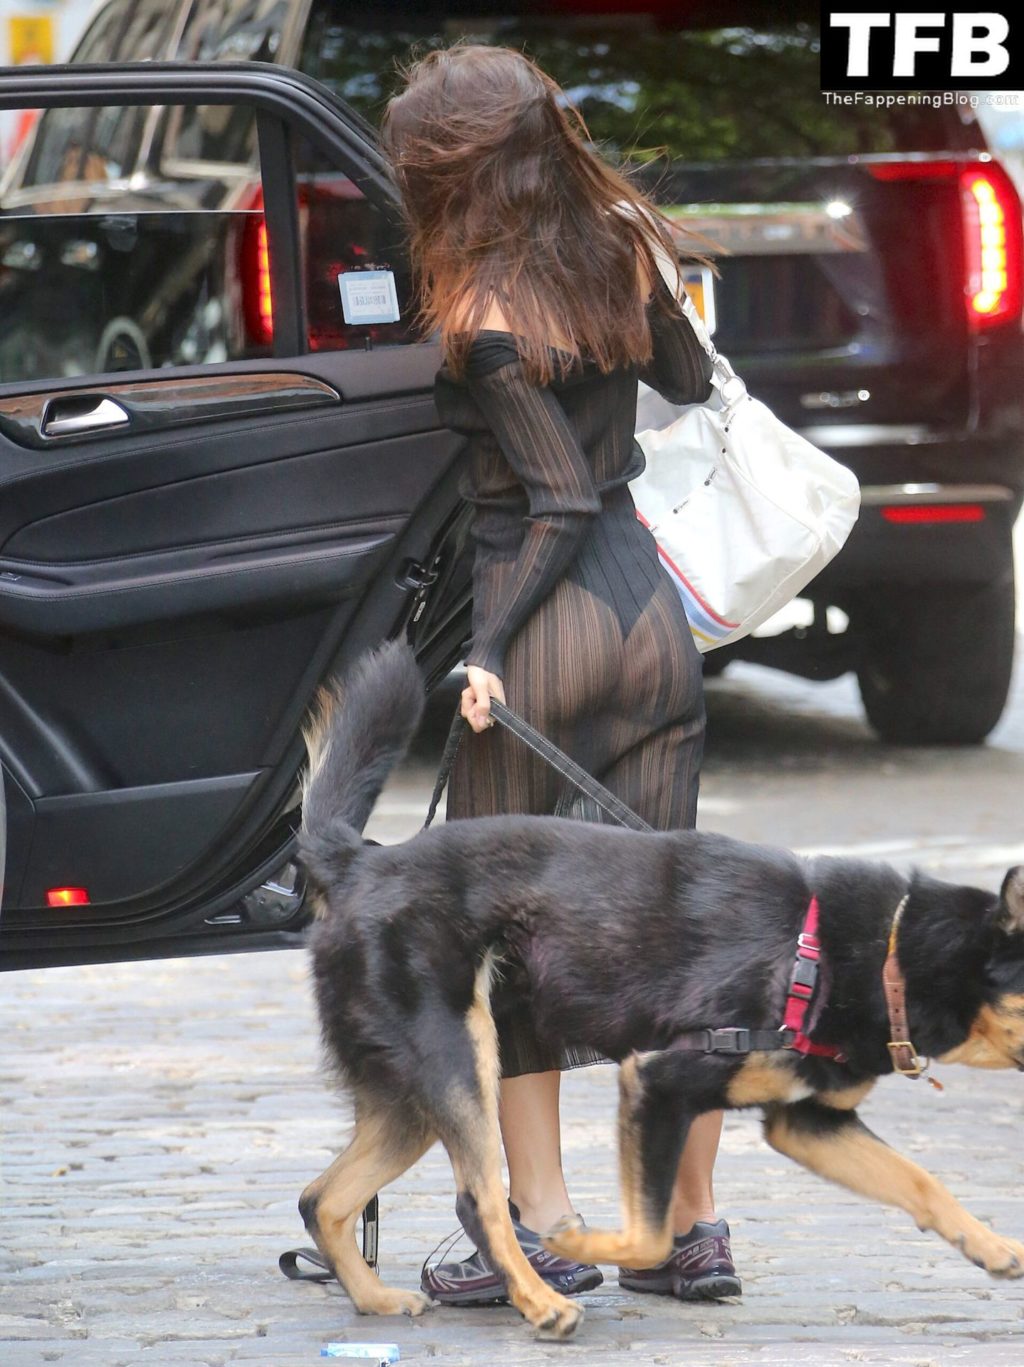 Emily Ratajkowski Sexy The Fappening Blog 28 1 1024x1367 - Emily Ratajkowski Bares It All in a See-Through Dress While Out Walking Her Dog in New York (33 Photos)